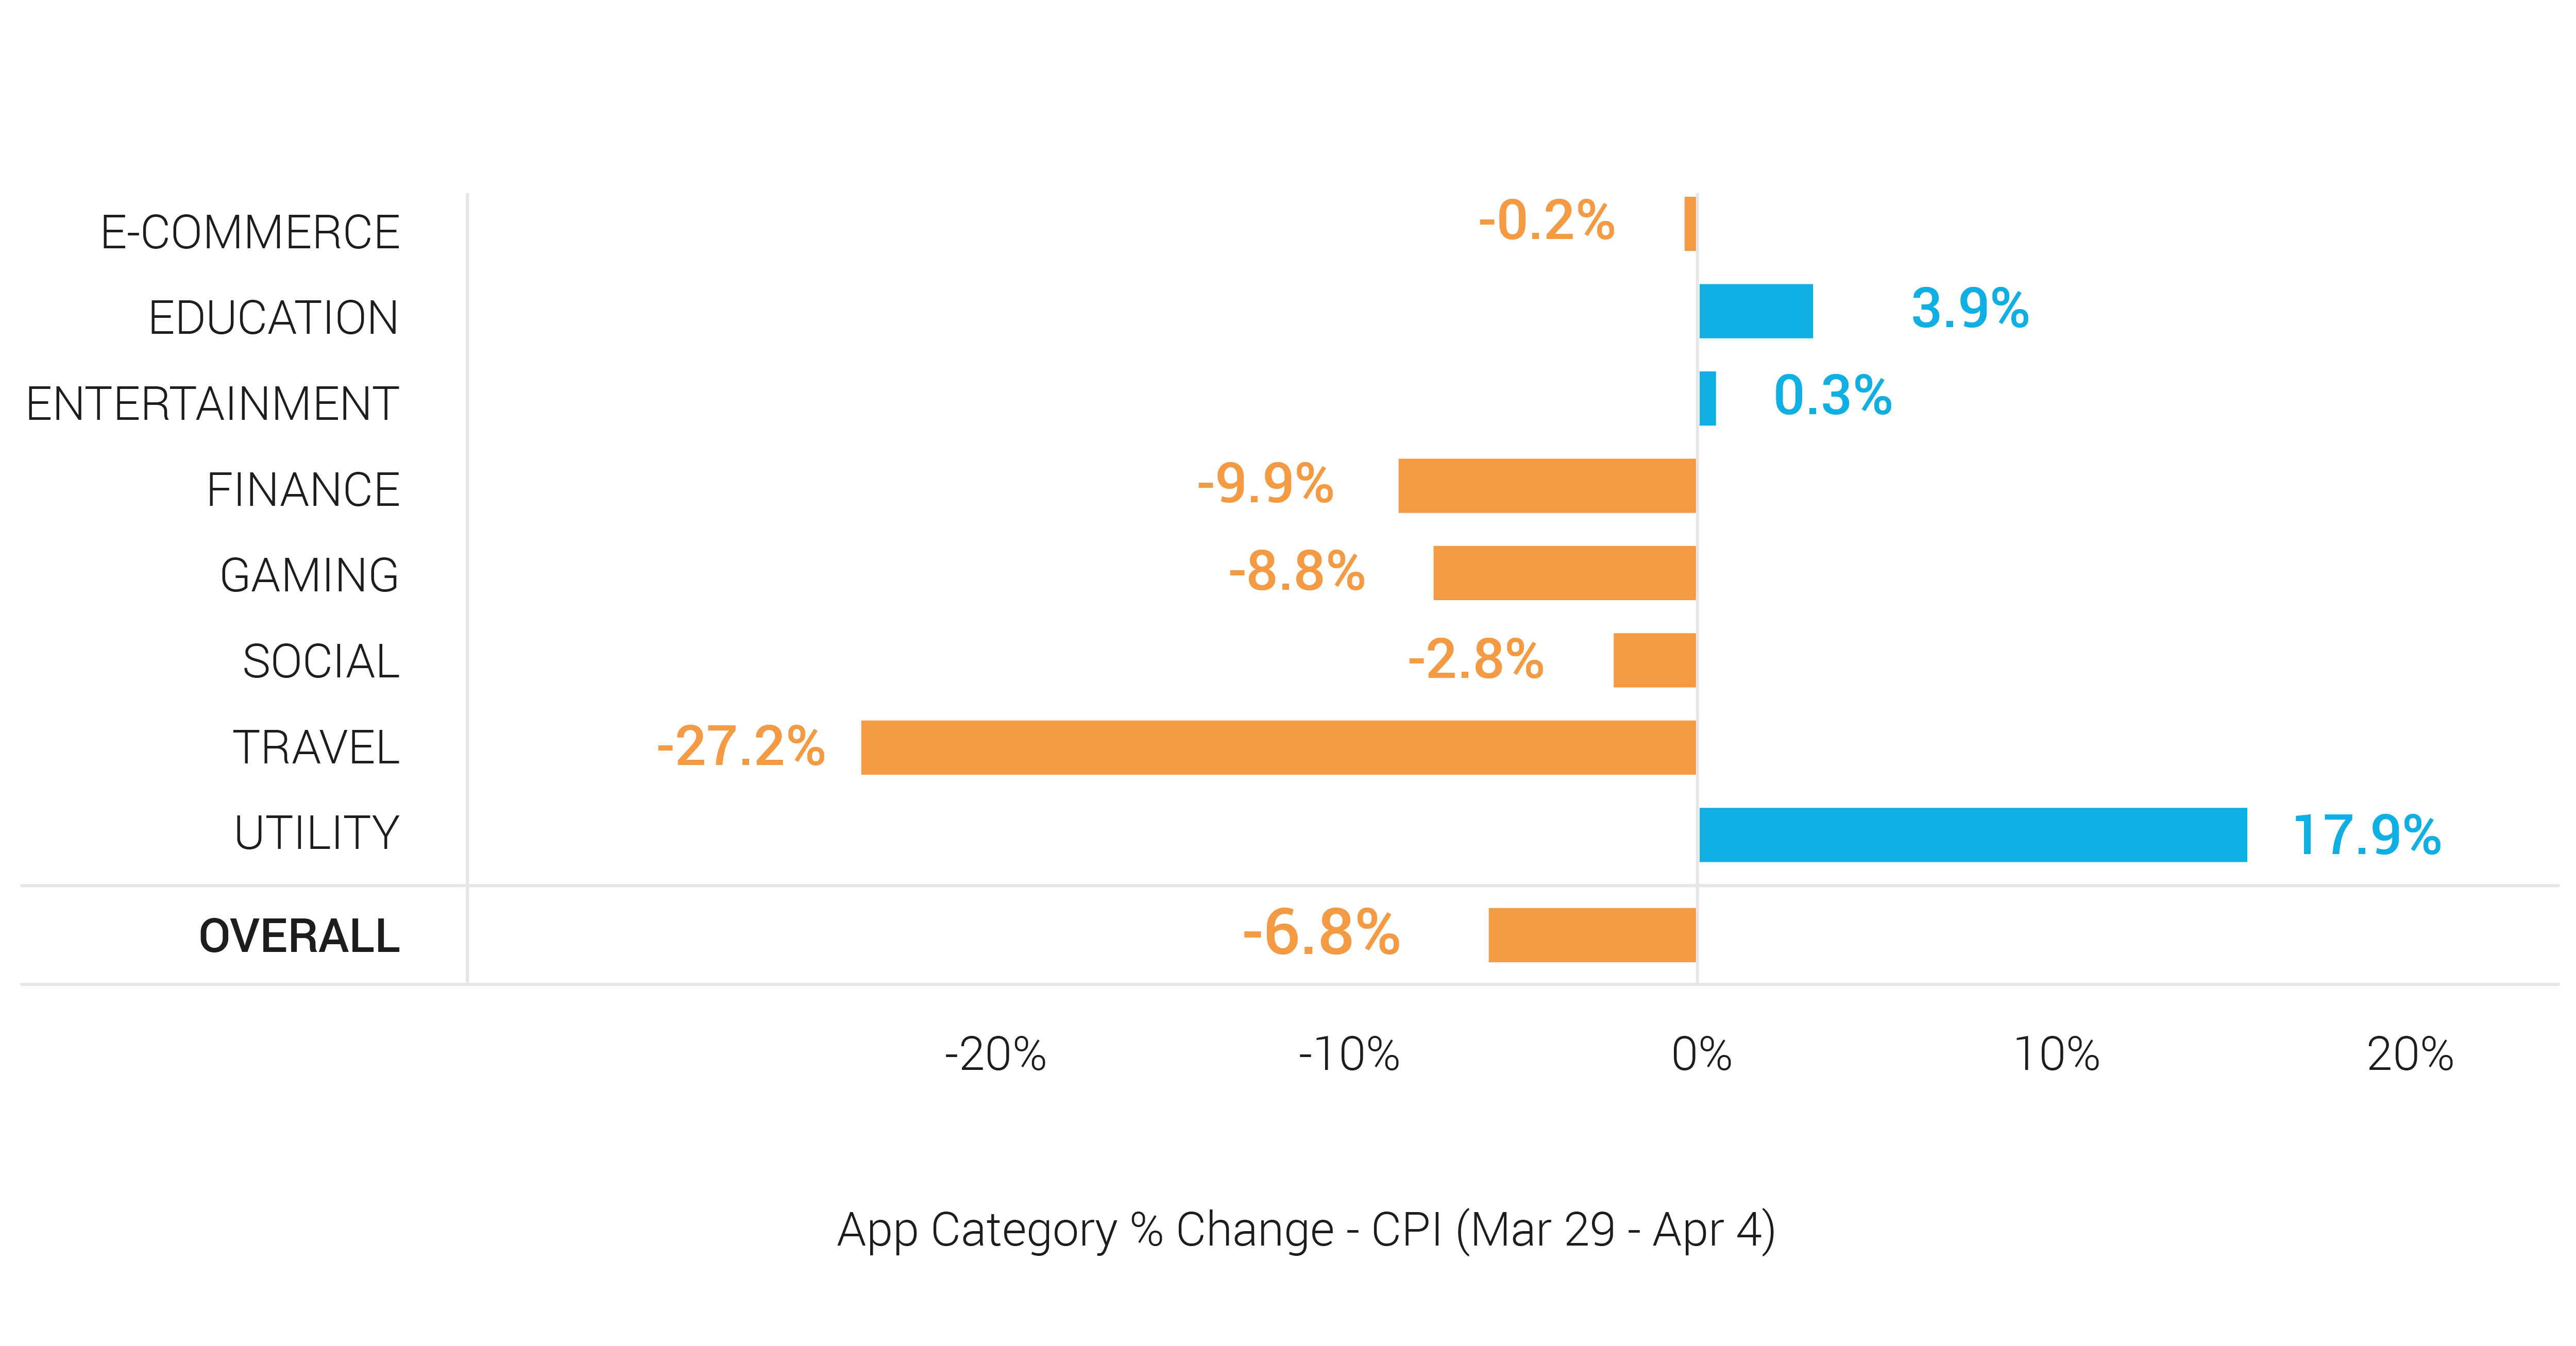 App Category % Change - CPI (March 29 - April 4)